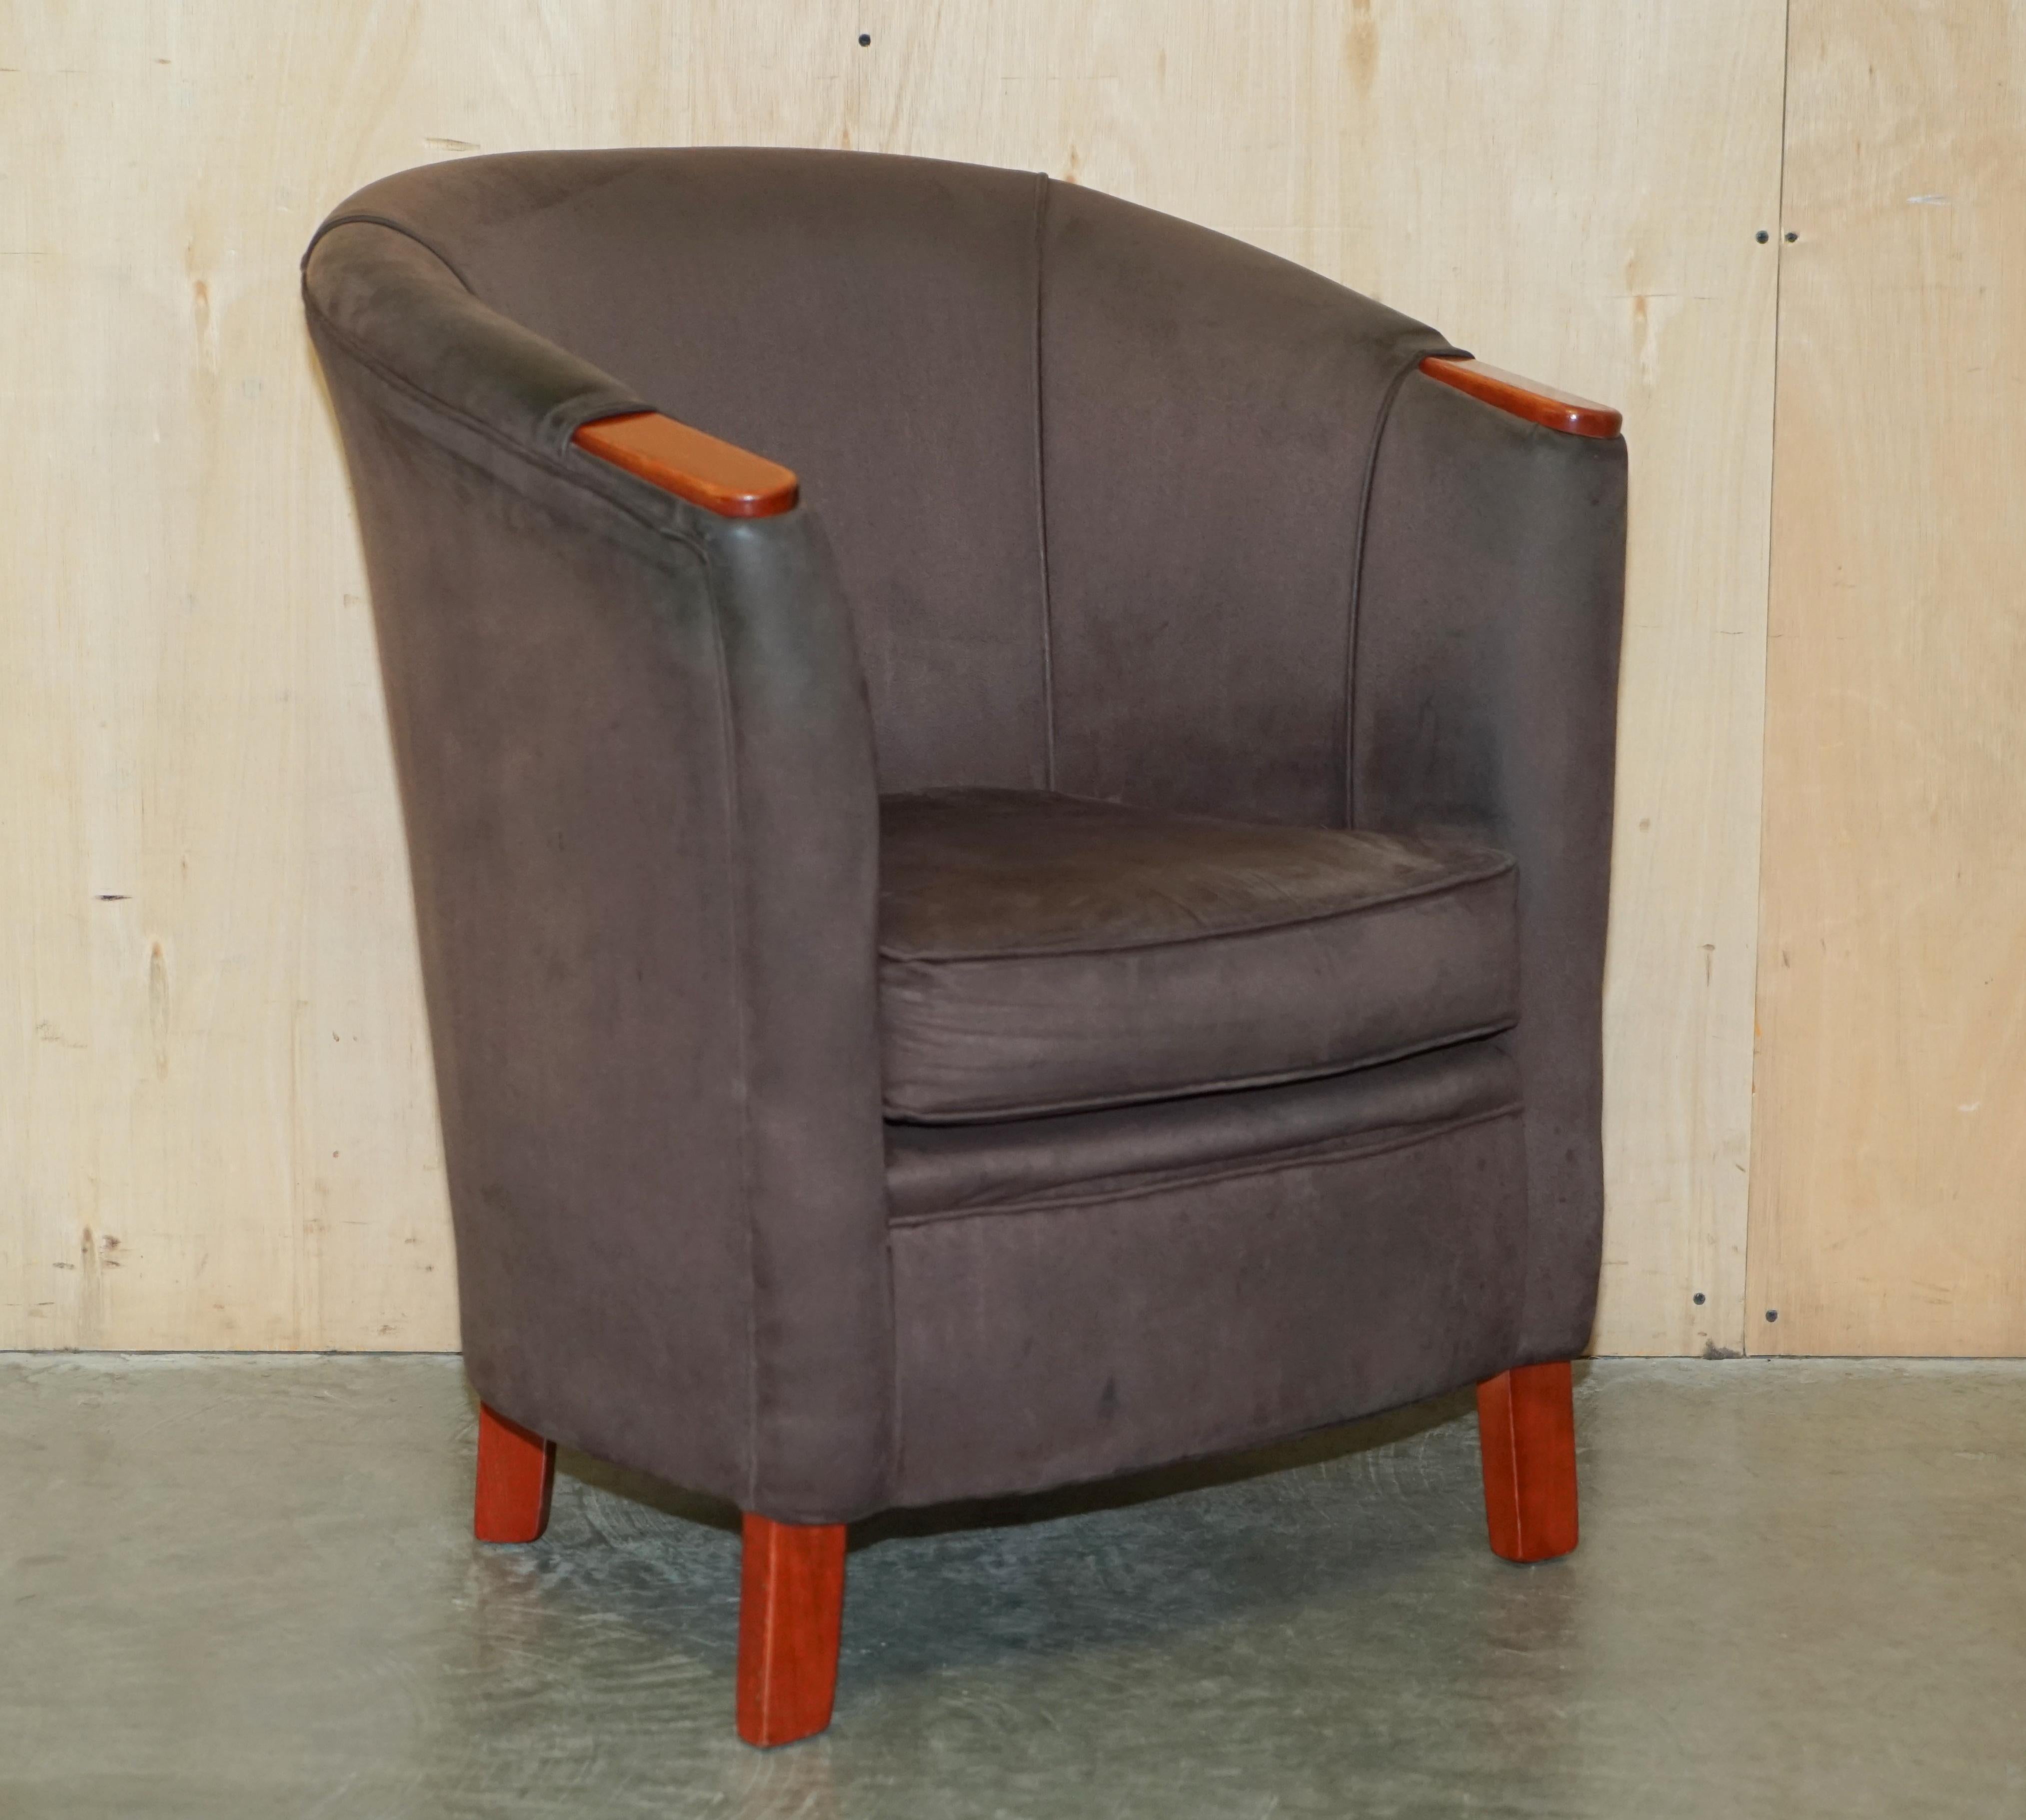 Royal House Antiques

Royal House Antiques is delighted to offer for sale this nice pair vintage suede club tub armchairs in suede which is from a very sophisticated Scottish castle hotel 

Please note the delivery fee listed is just a guide, it